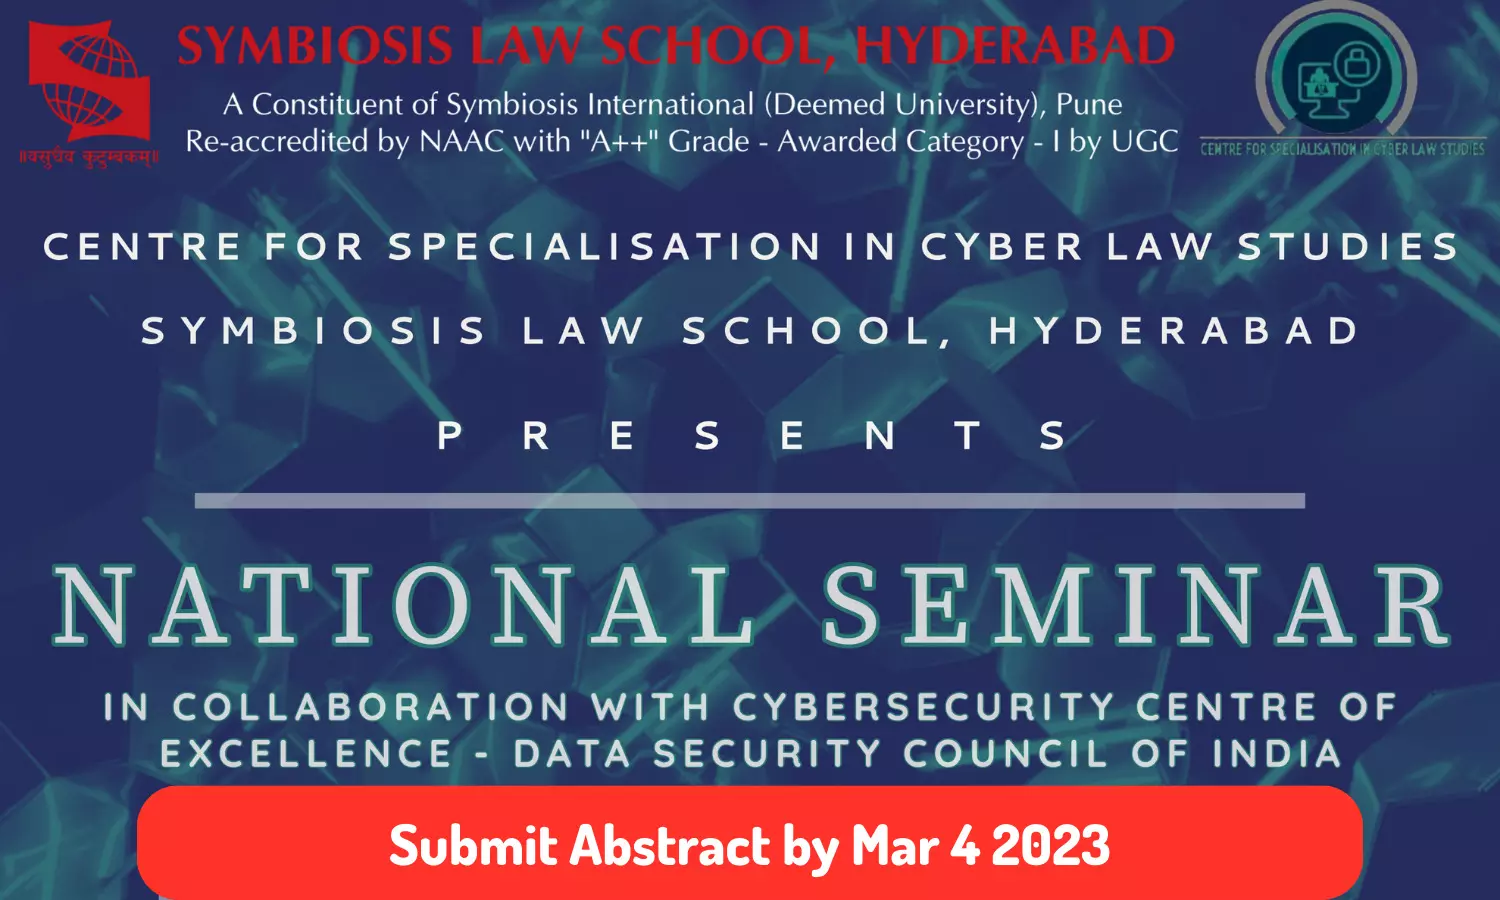 Call for Papers | National Seminar on Emerging Technological Trends in Cyber Law and Cyberspace Regulations | Symbiosis Law School, Hyderabad | Submit by Mar 15 2023